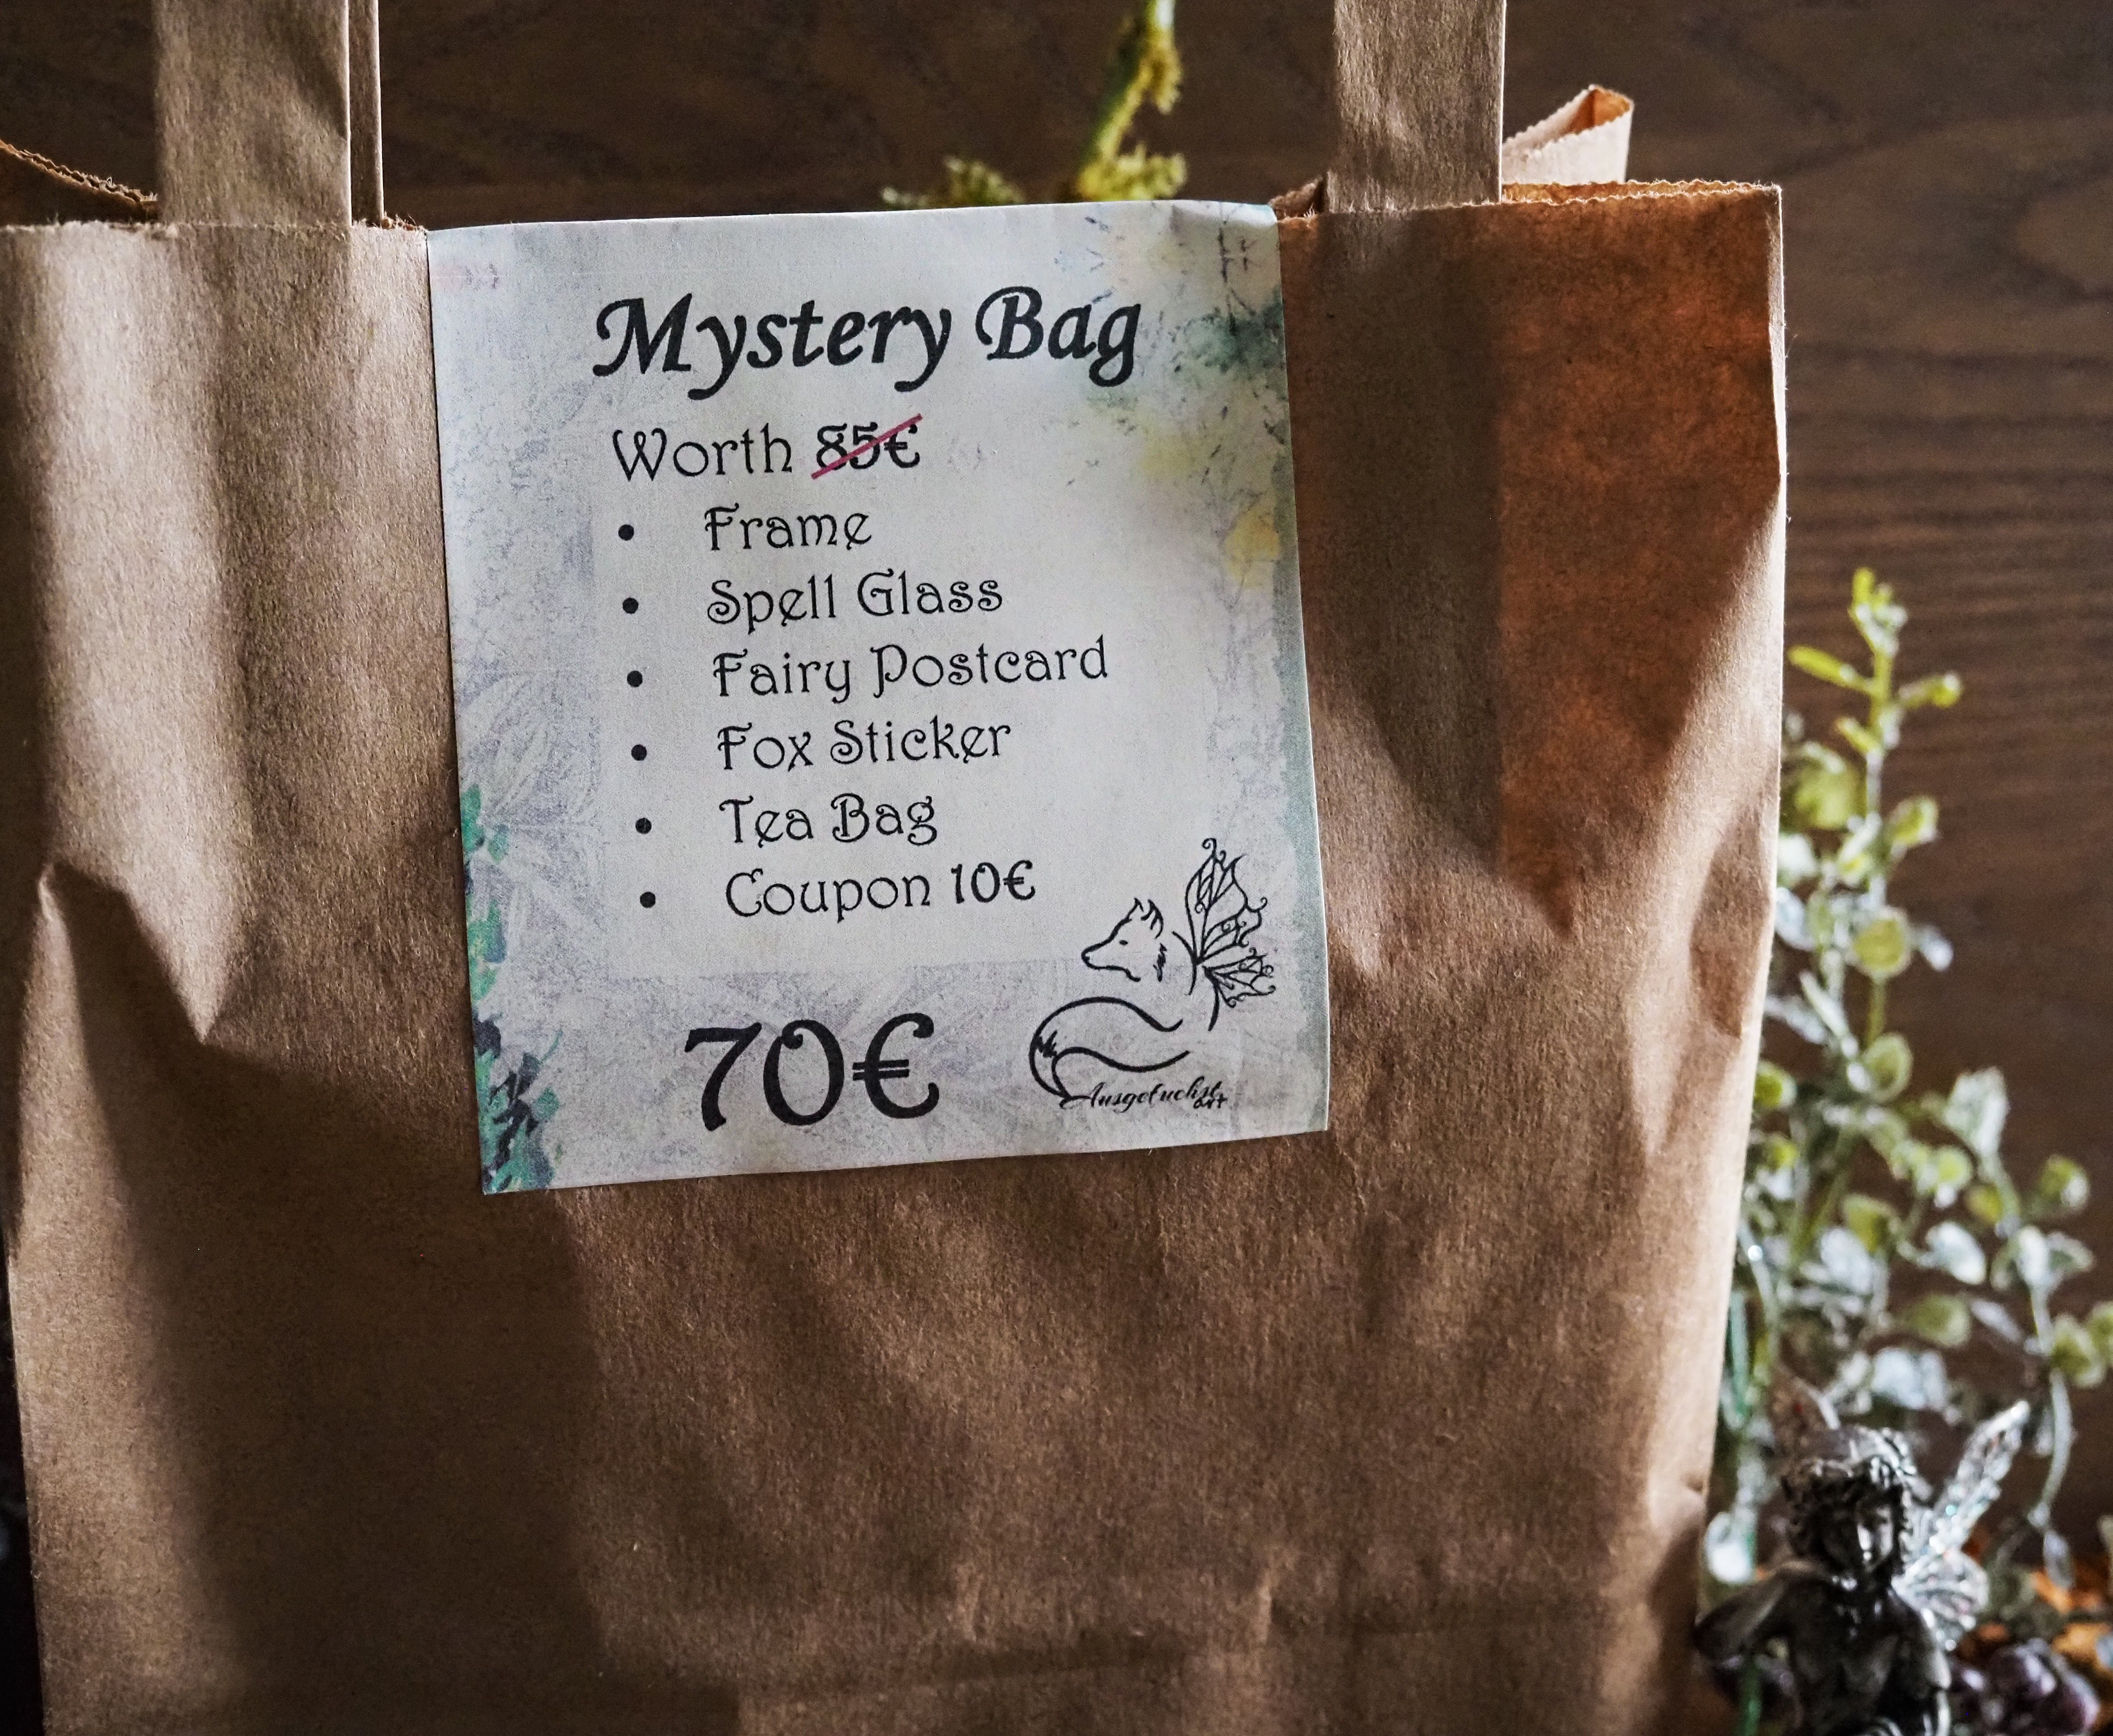 Mystery Bag XXL - Frames and Wishing Spell Glasses